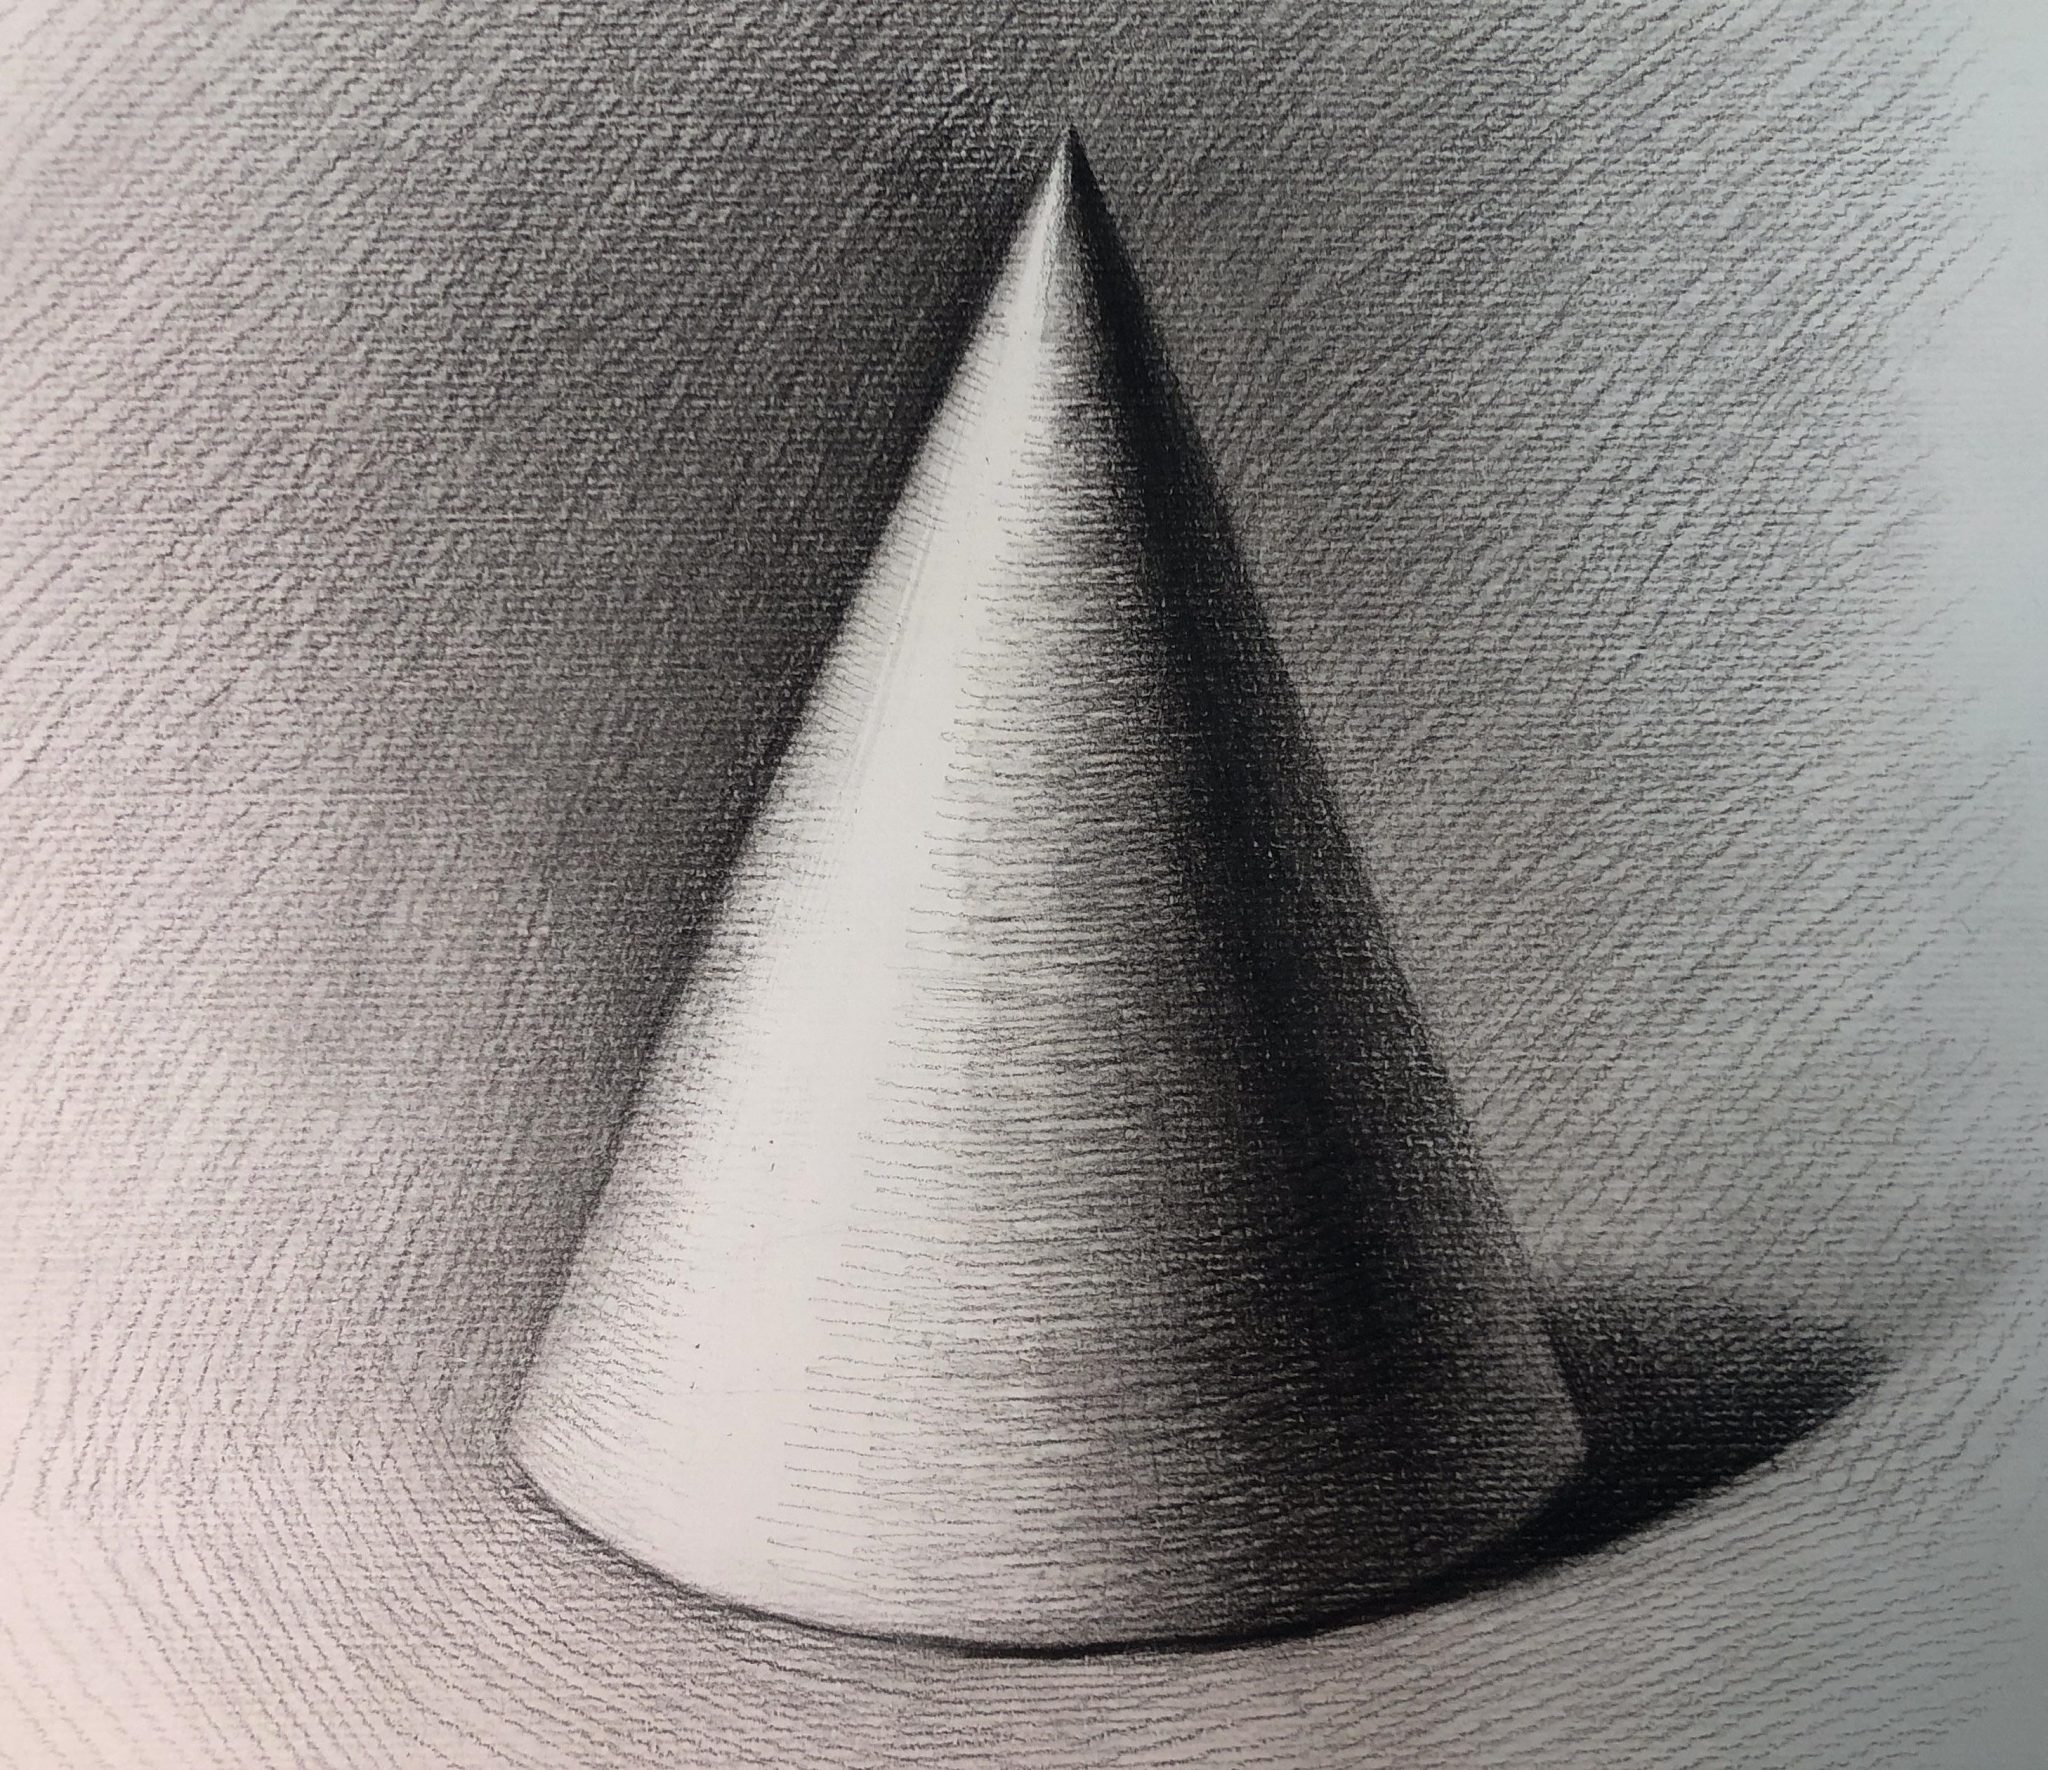 How to Draw a Cone Step by Step